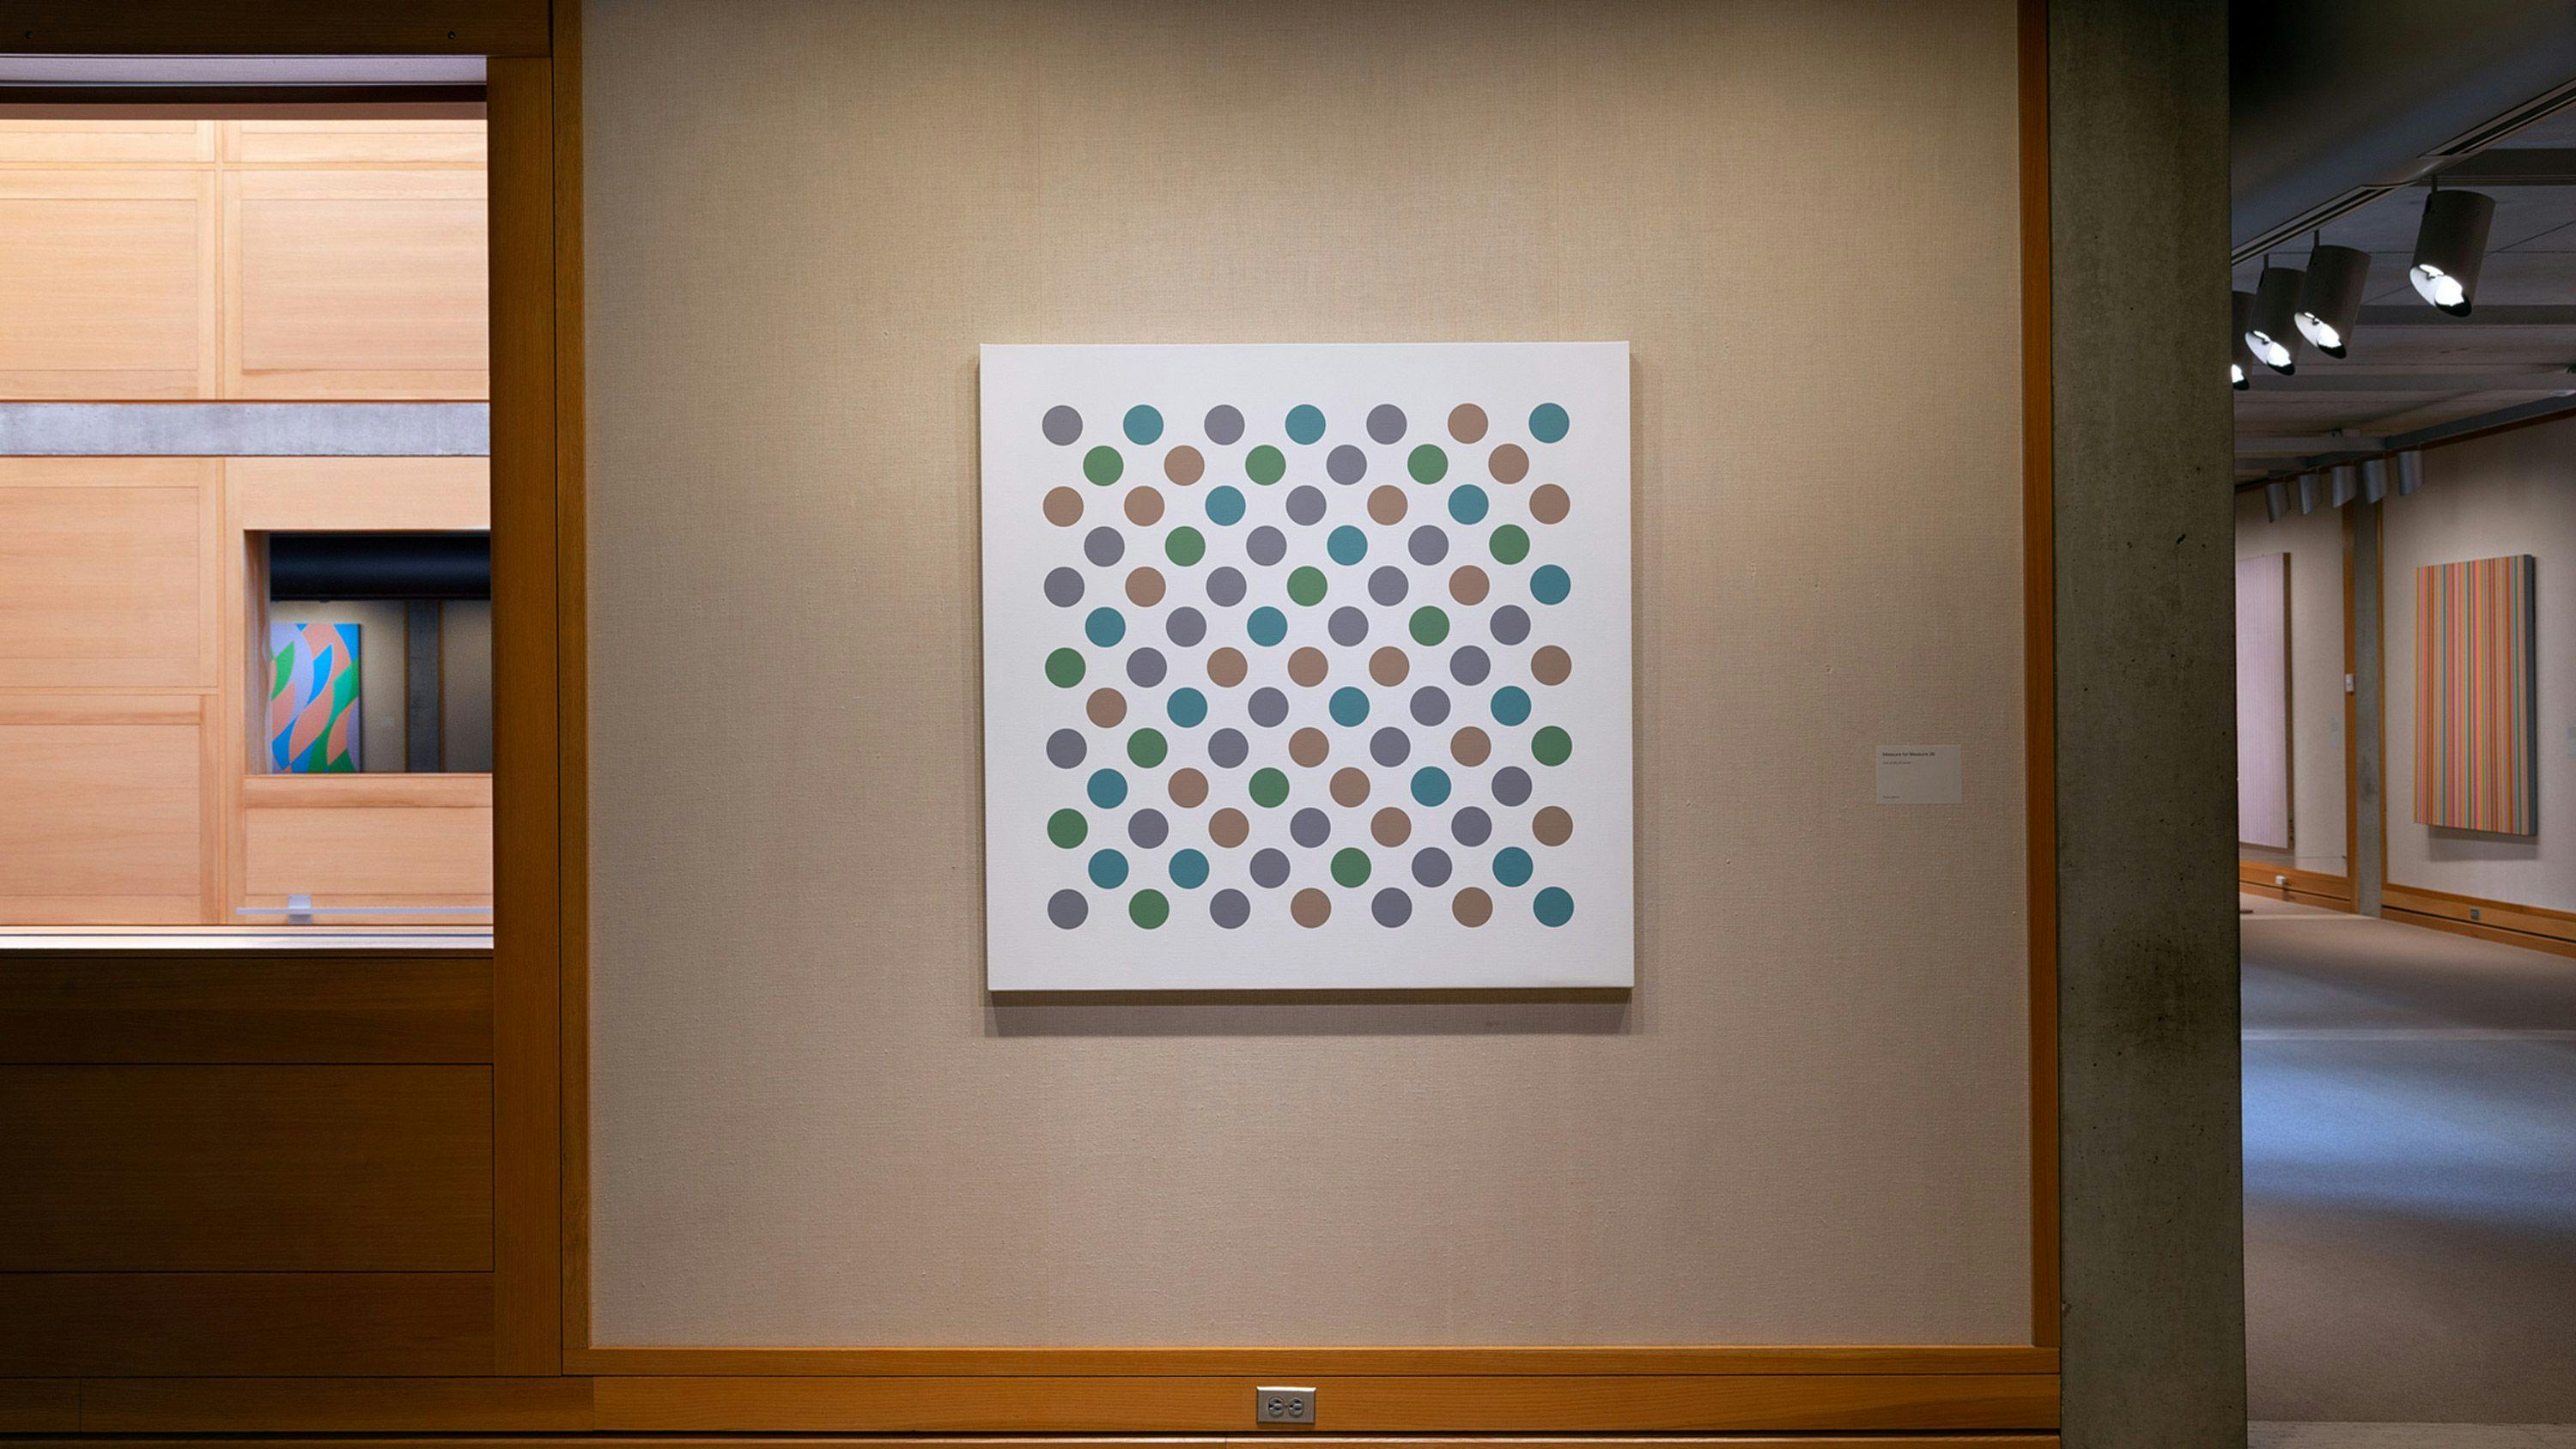 An installation view of the exhibition, Bridget Riley: Perceptual Abstraction, at the Yale Centre for British Arts, dated 2022.